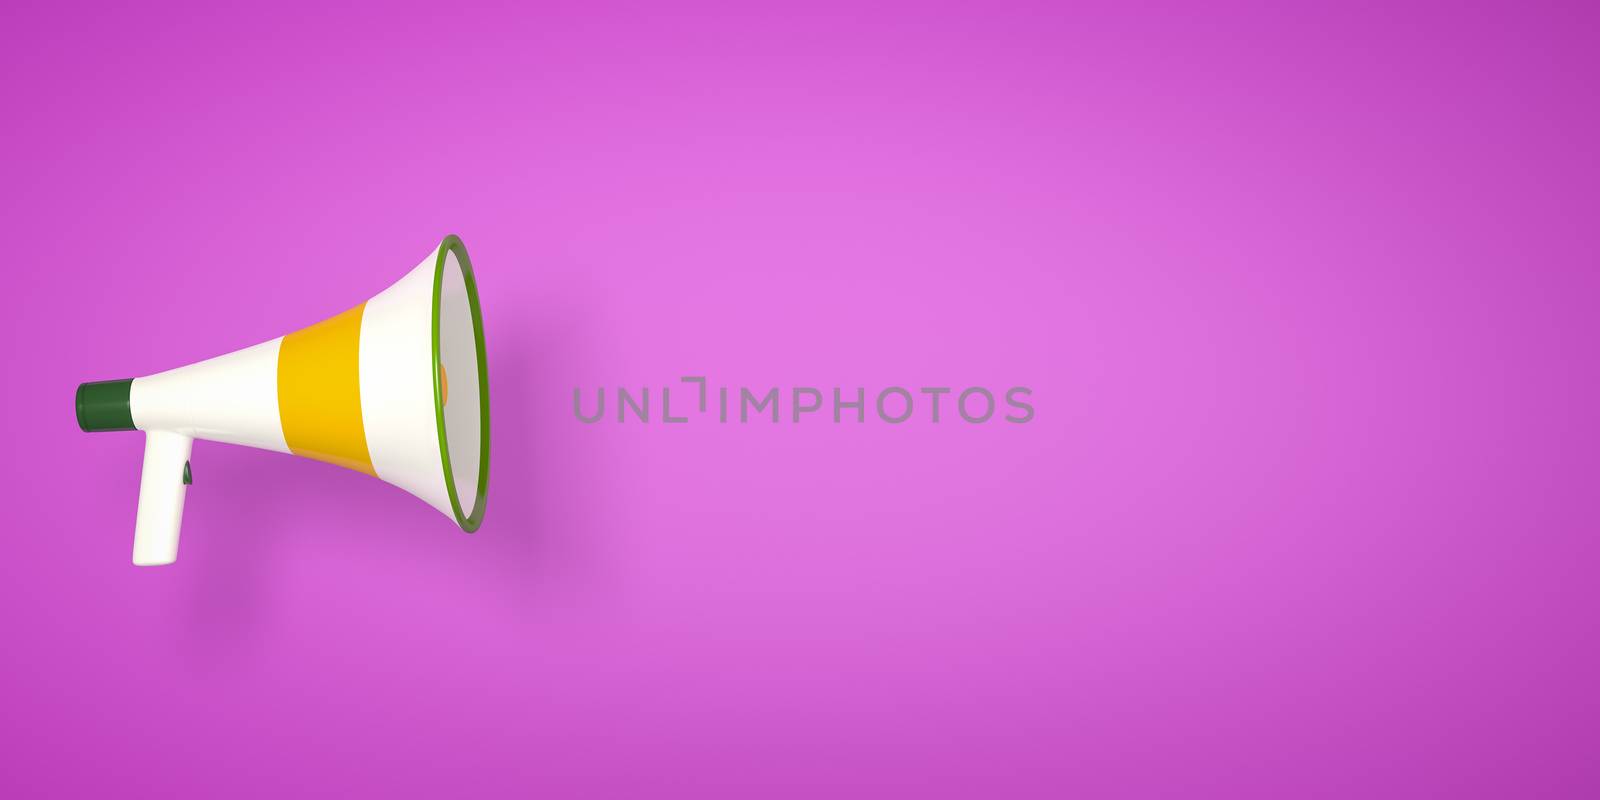 An image of a typical megaphone on a pink background